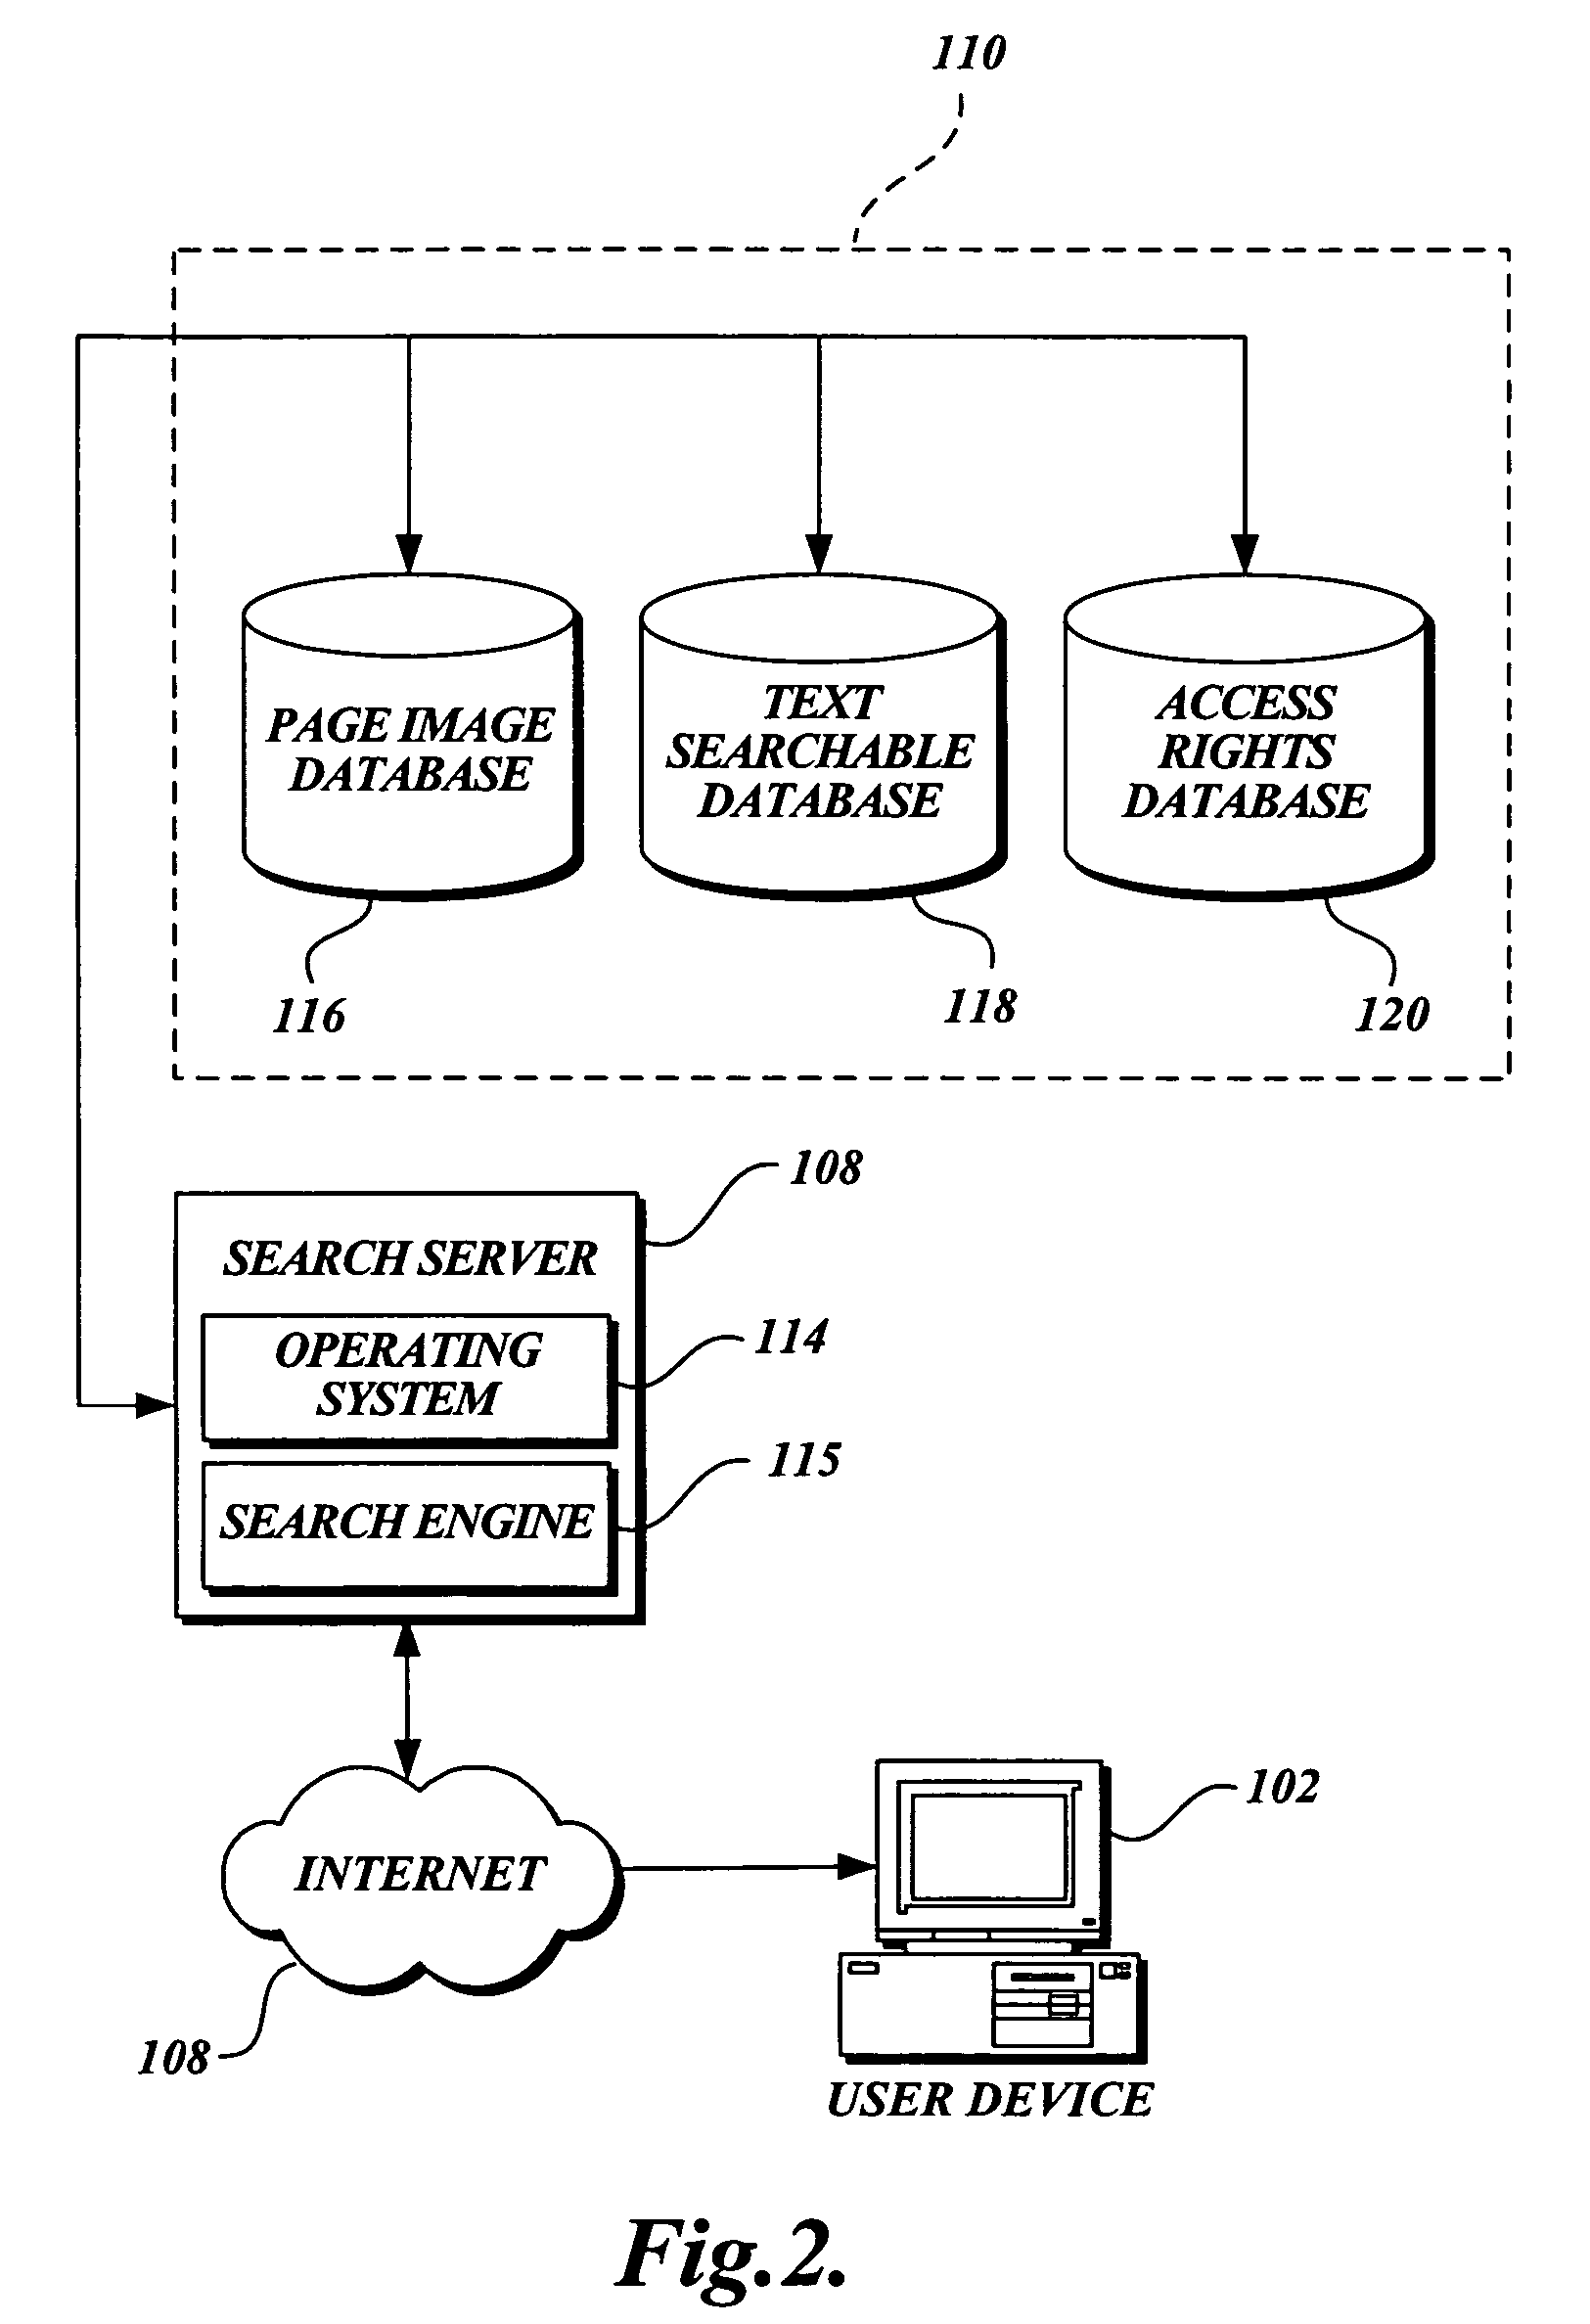 Method and system for access to electronic images of text based on user ownership of corresponding physical text